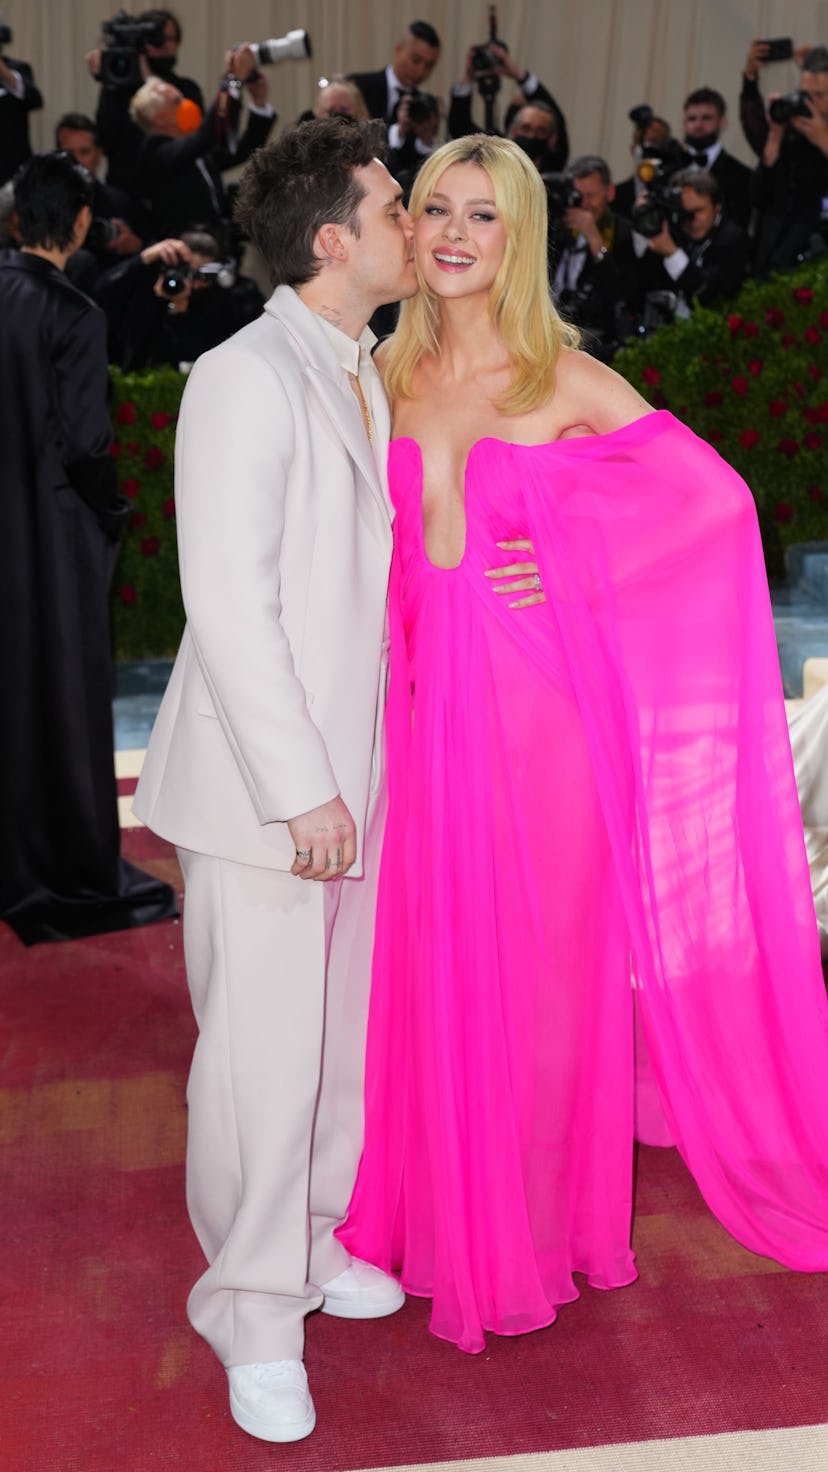 Nicola Peltz's post-wedding style includes bright colors as seen in this pink draped gown, at the 20...